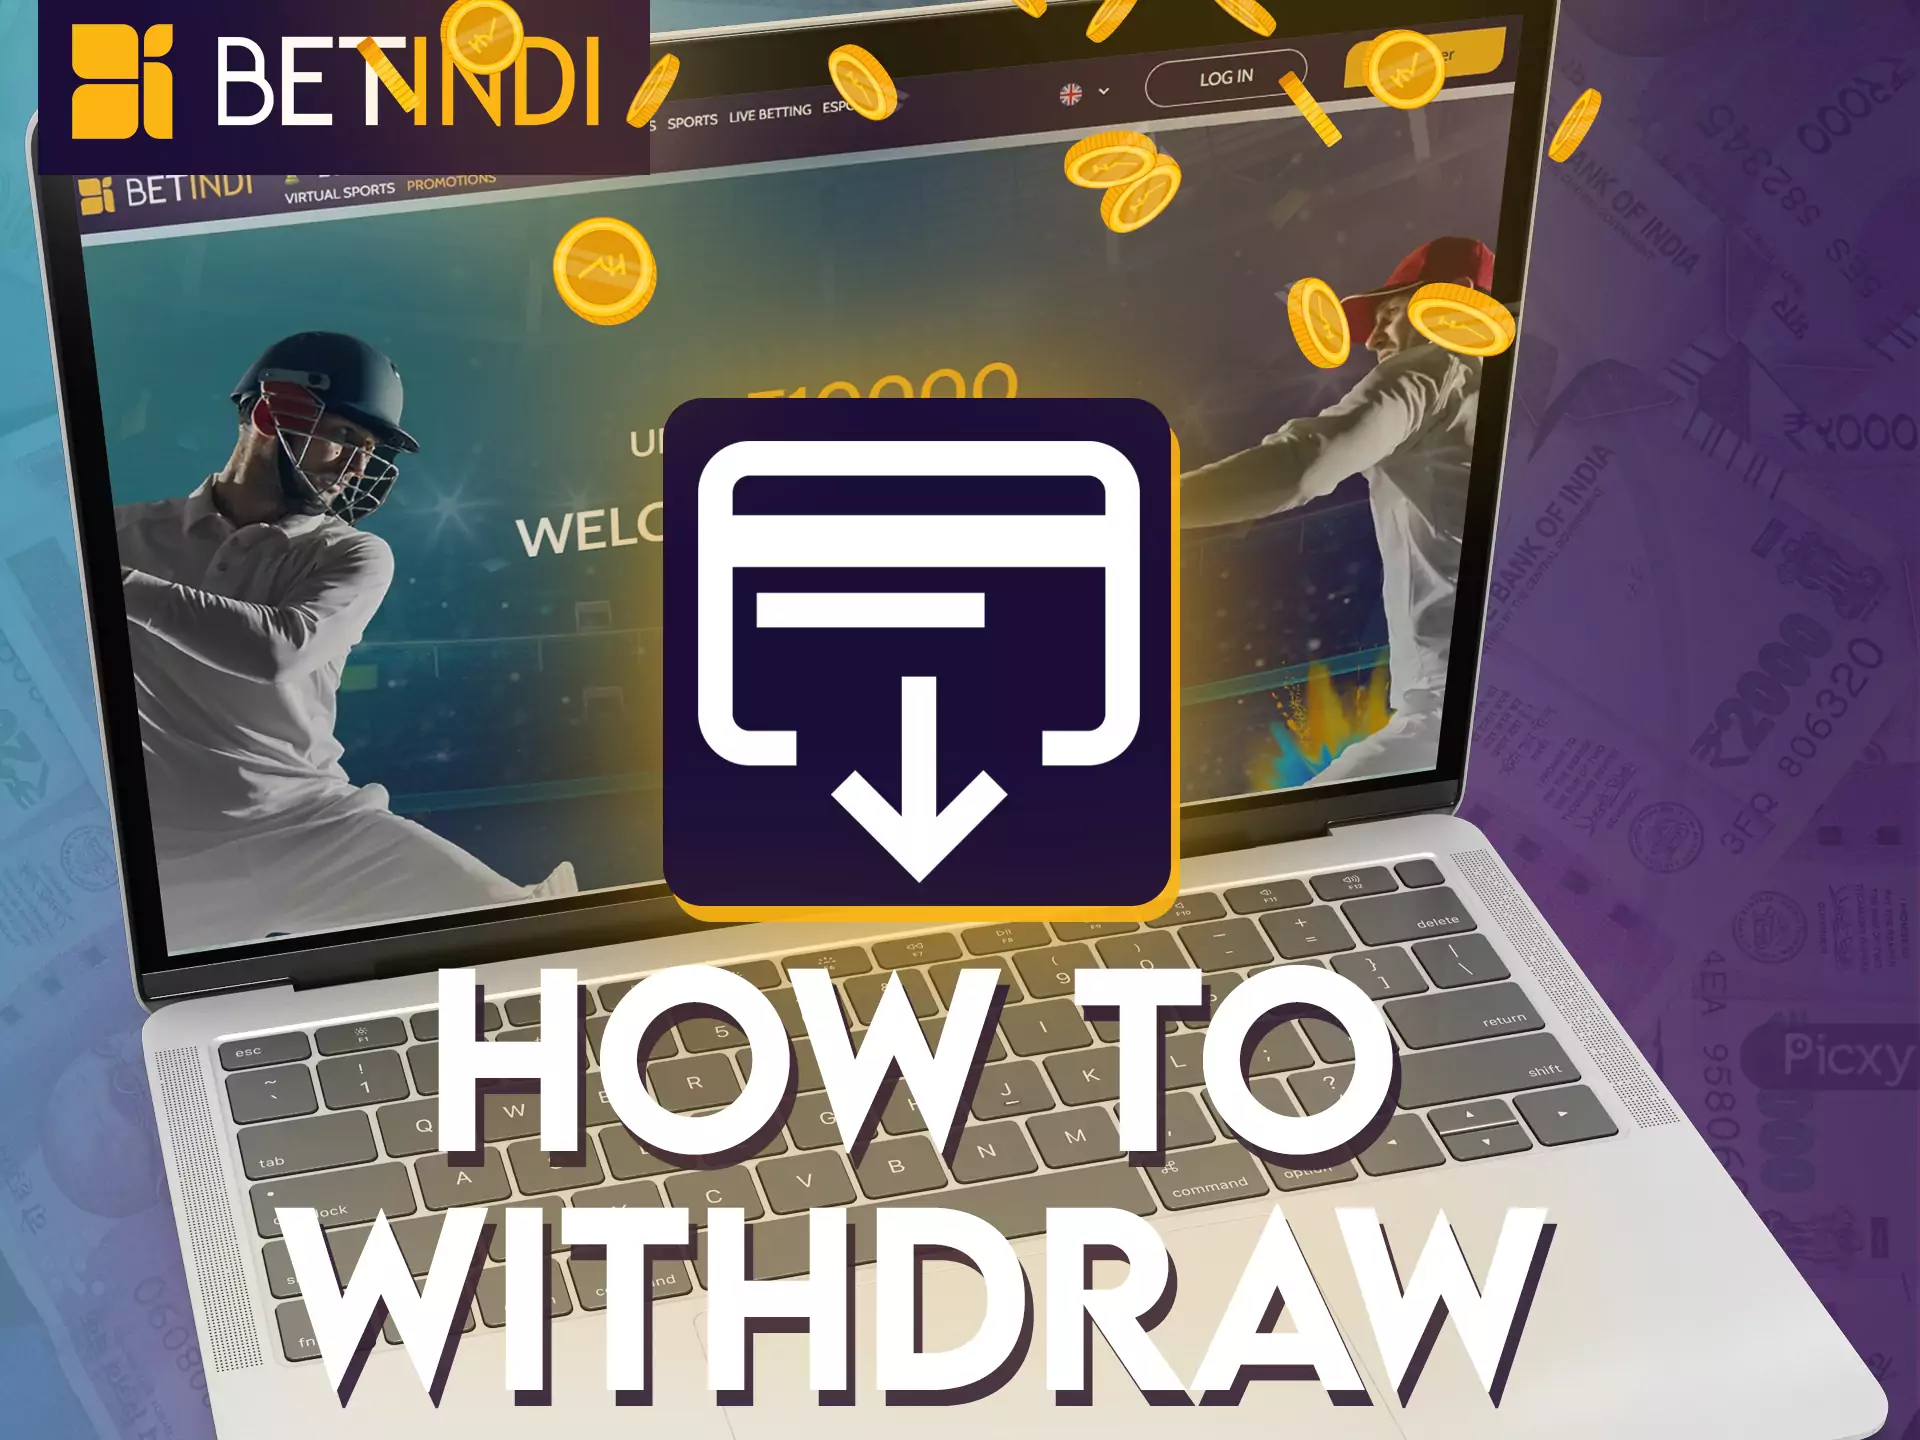 With this instruction, you can easily withdraw money from Betindi.